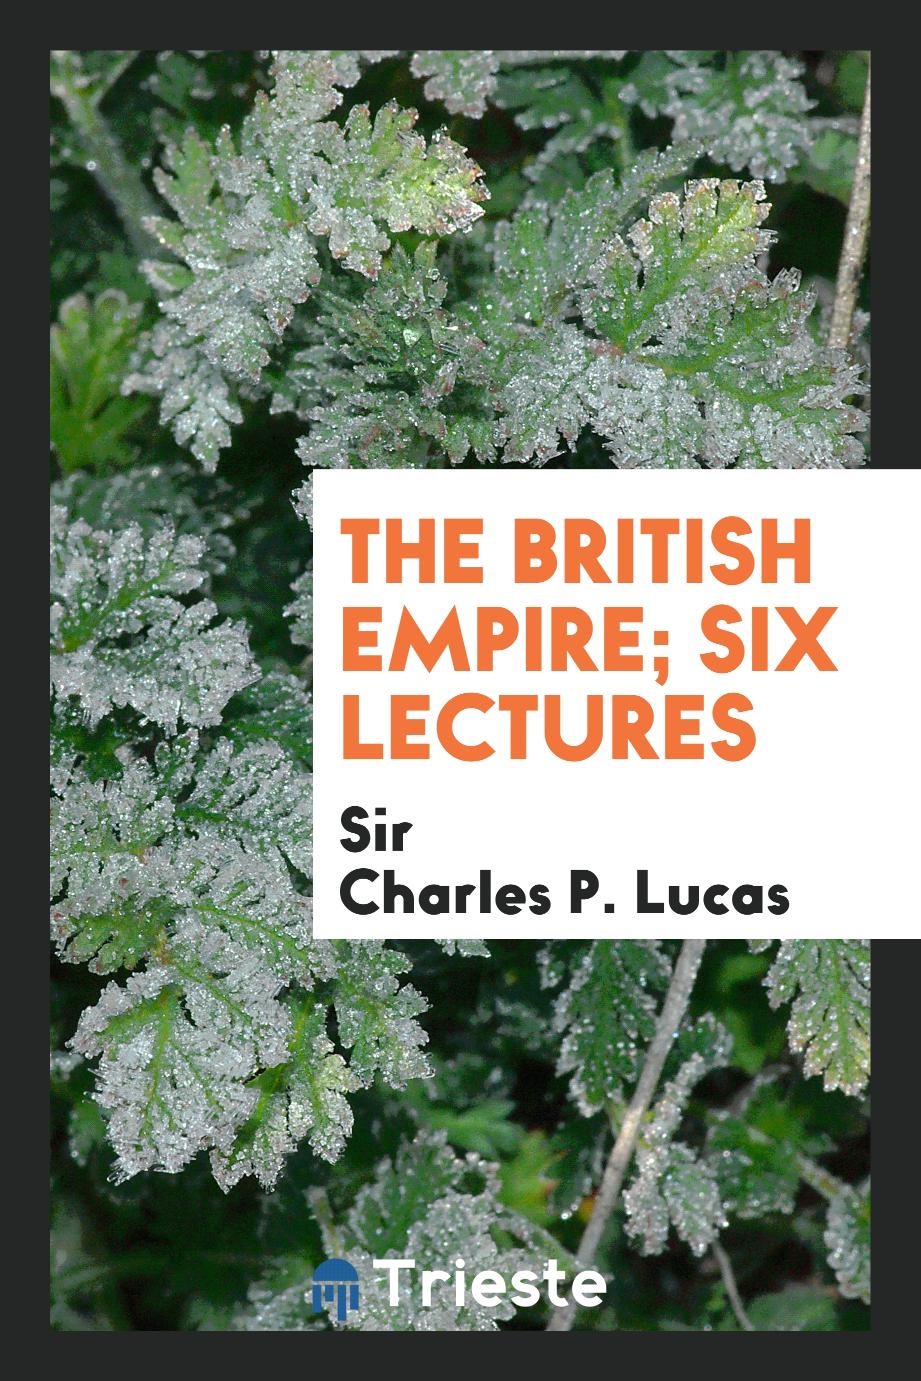 The British empire; six lectures